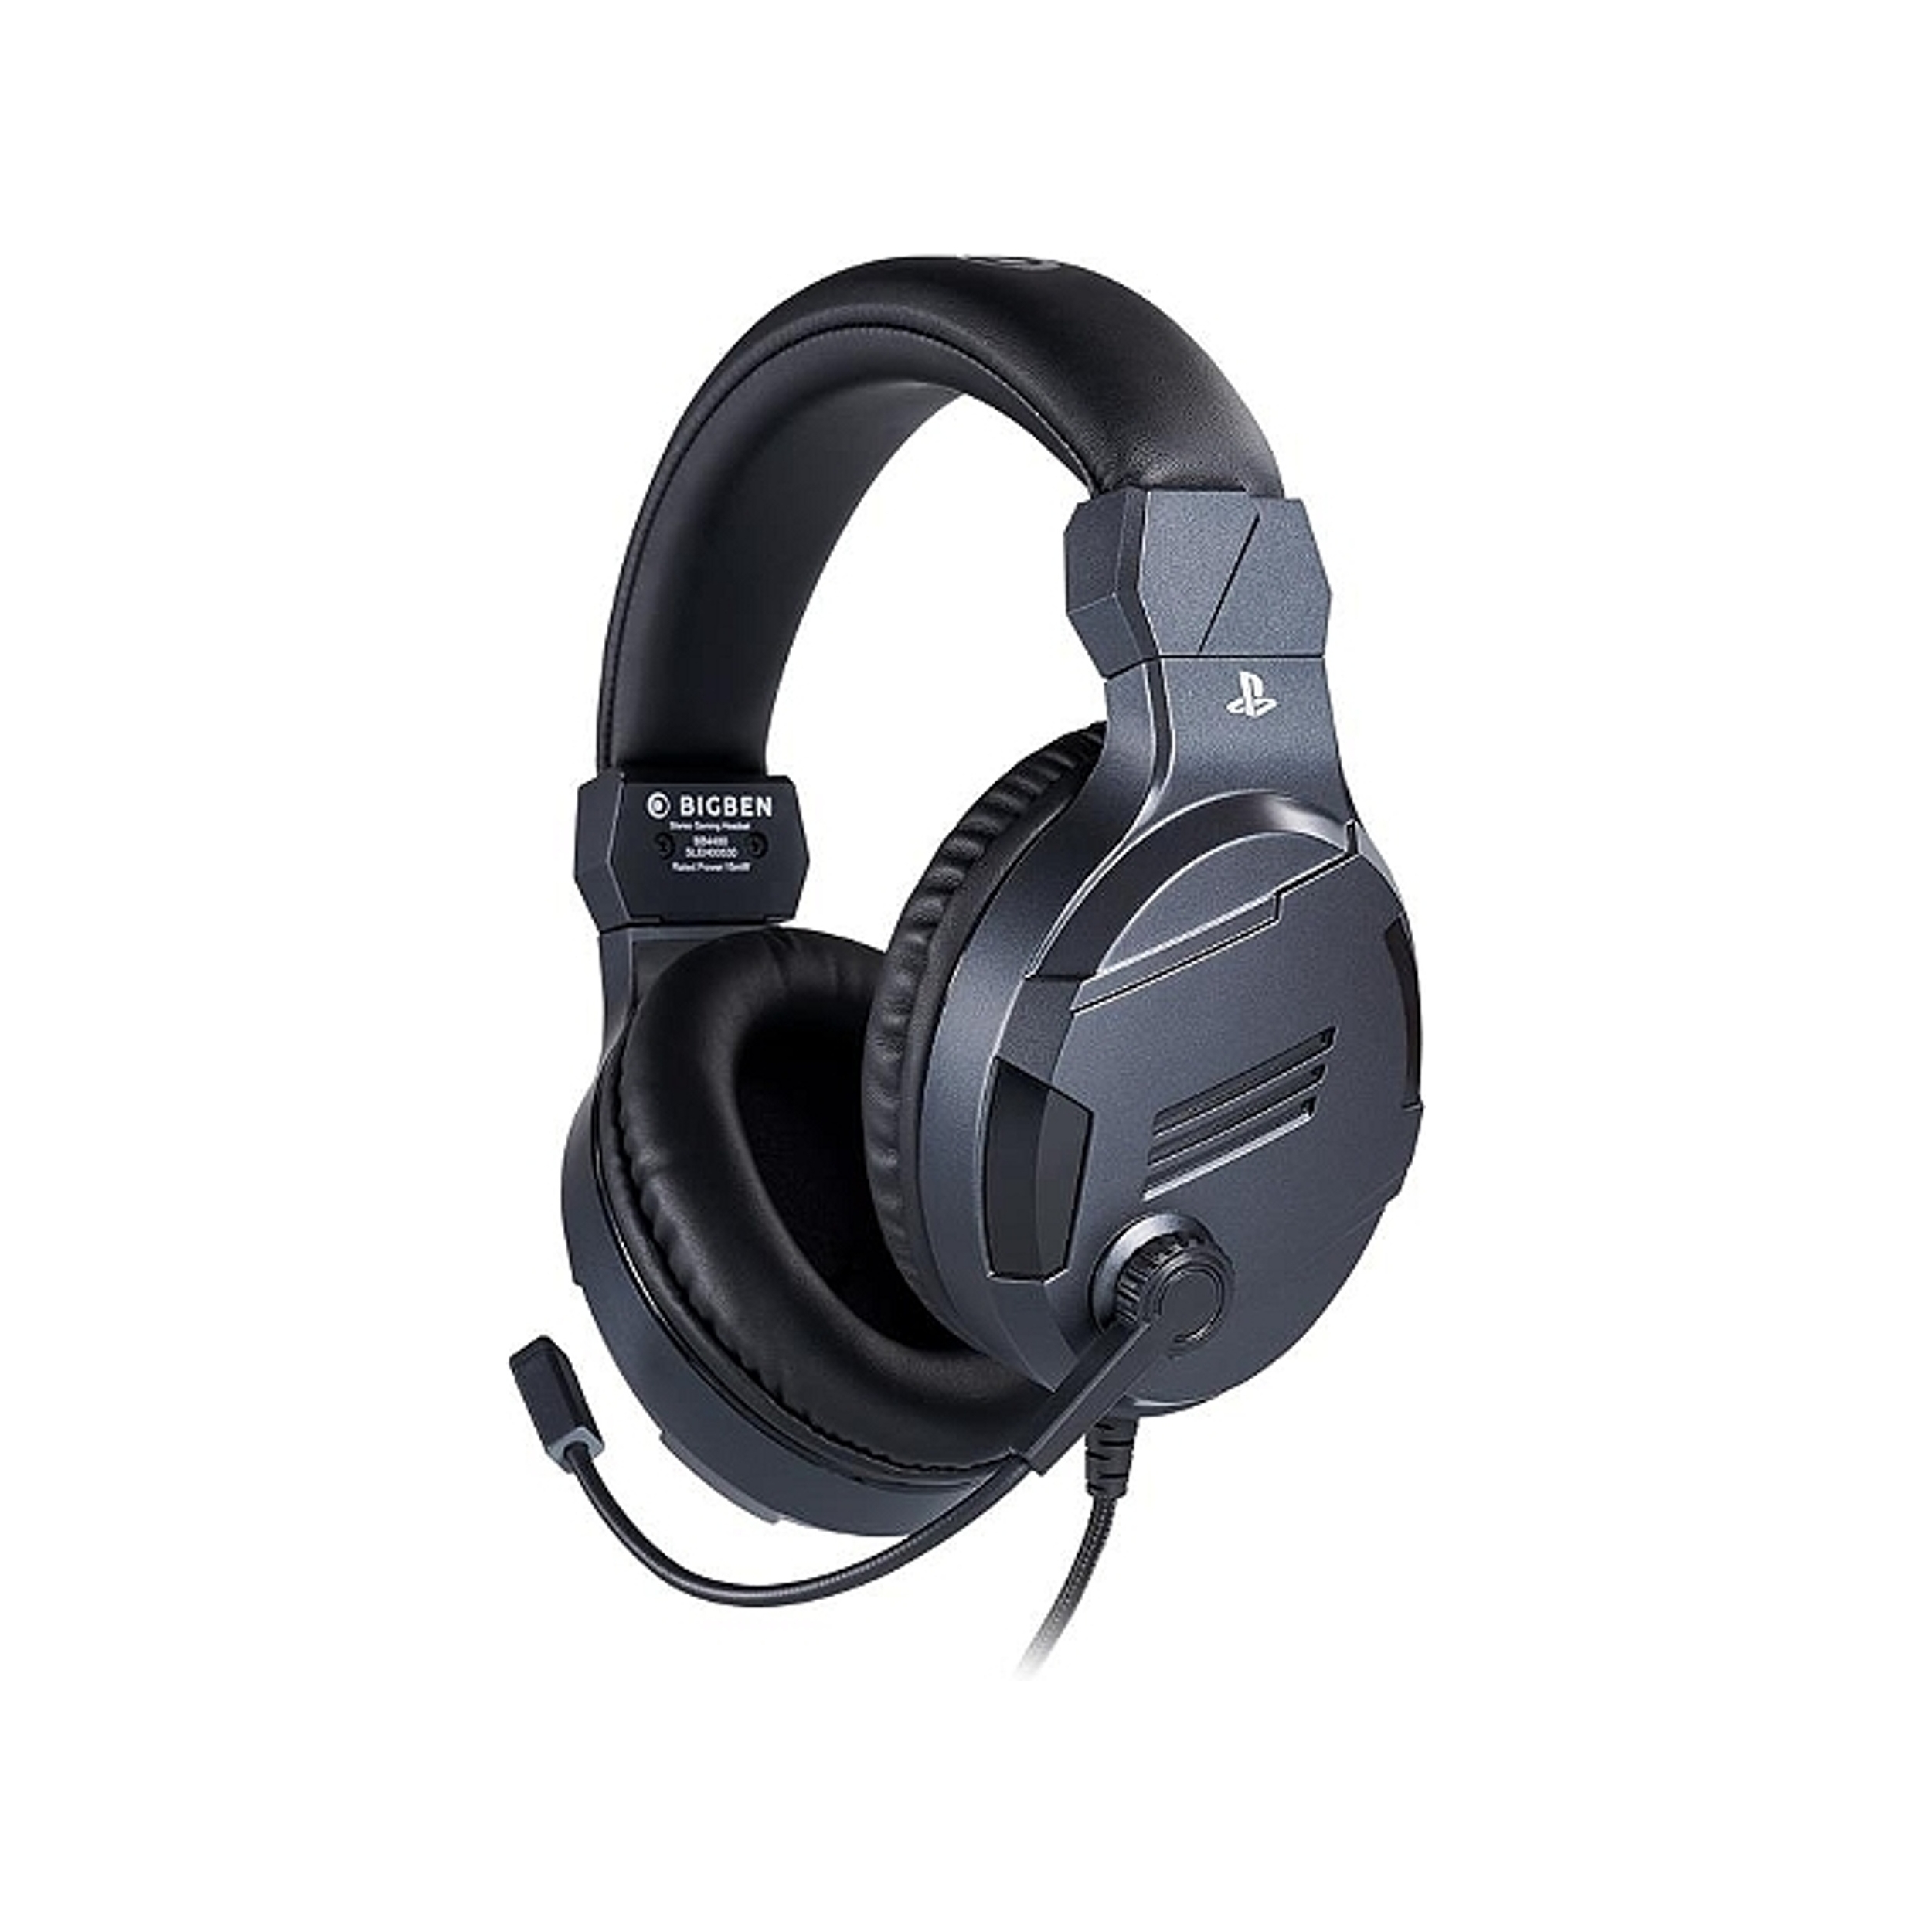 Bigben Stereo Gaming Headset for PS4 - Titanium